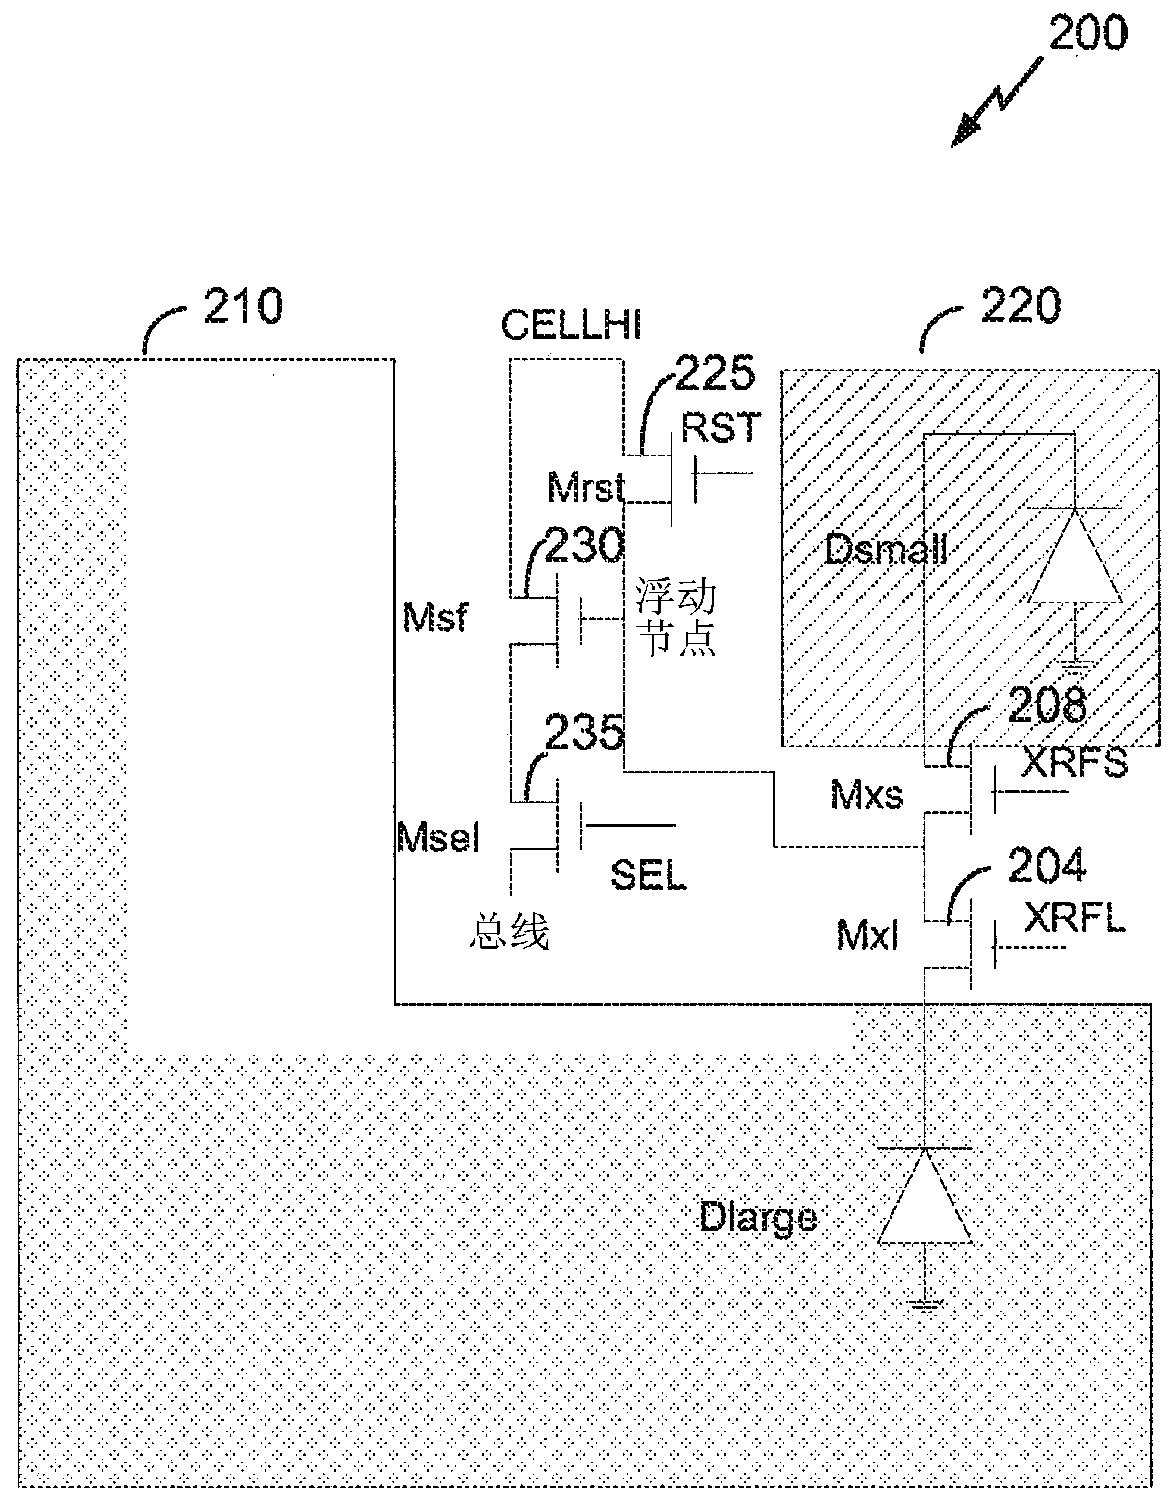 Systems and methods for capturing images with multiple image sensing elements